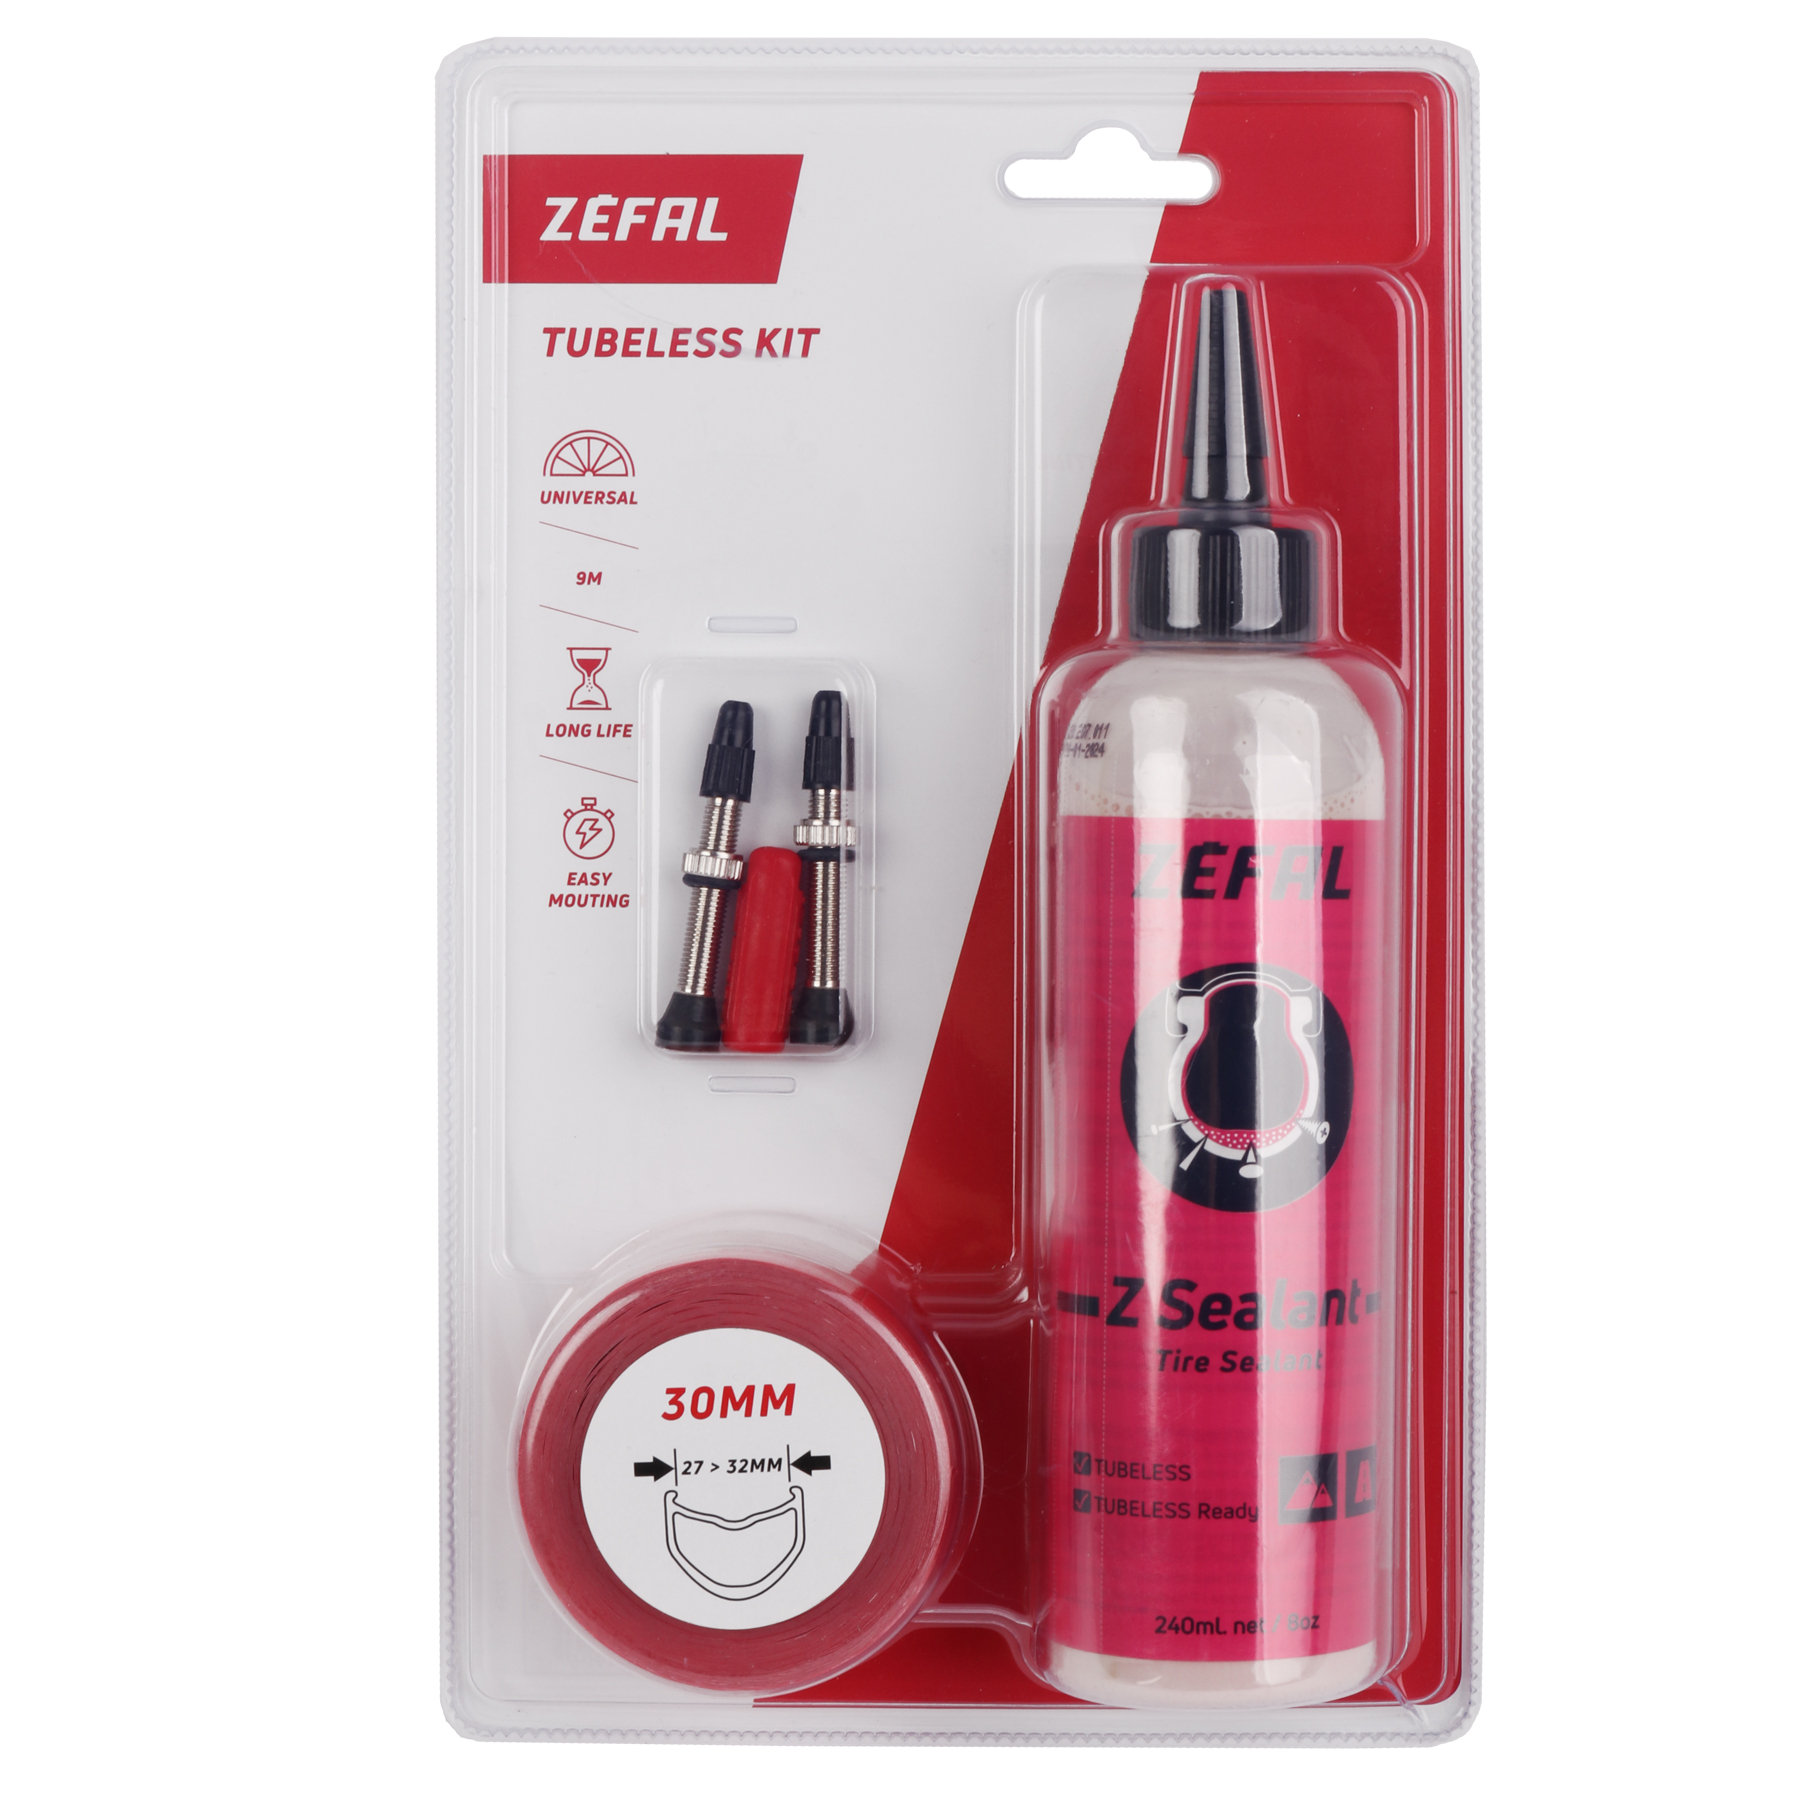 Picture of Zéfal Tubeless Kit - 30mm x 9m